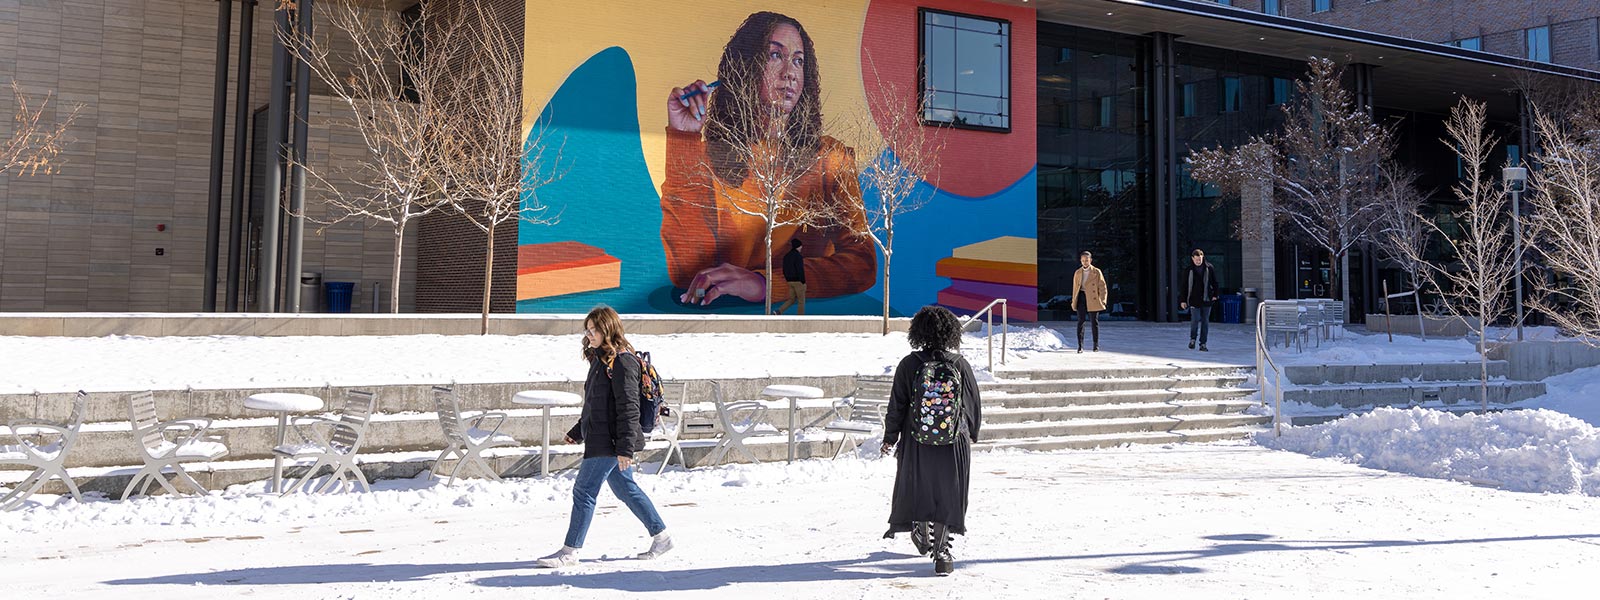 CU Denver students walking on snowy campus with mural in background